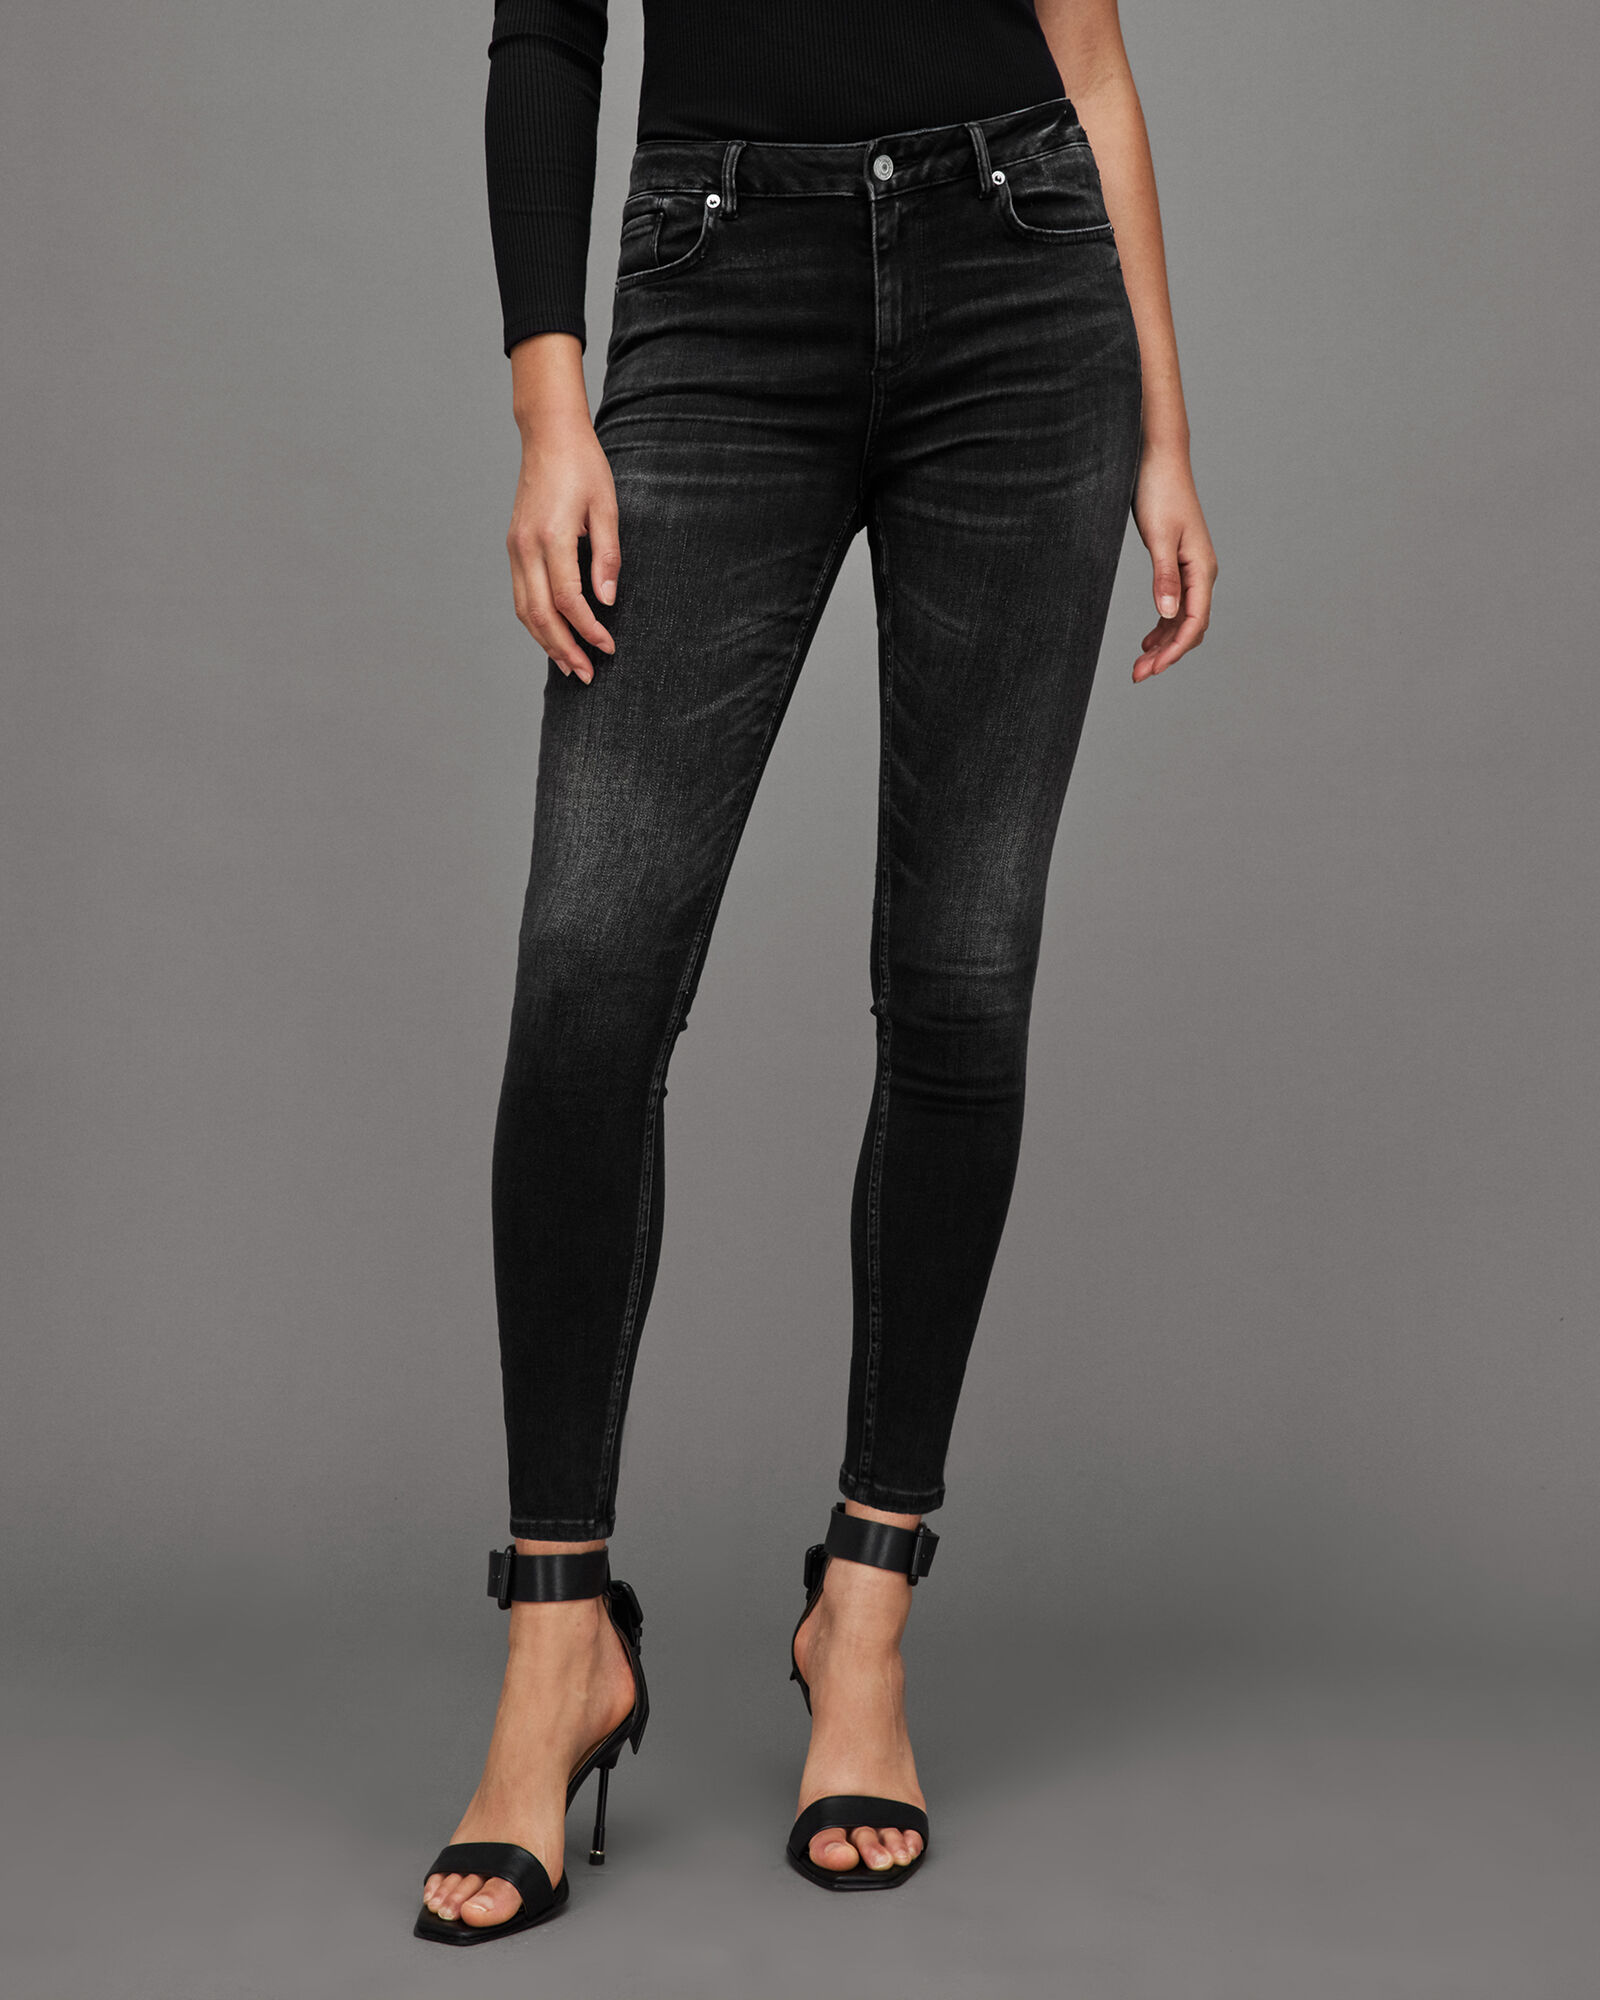 I Tried 19 Pairs of Black Skinny Jeans: These 7 Are the Best | Who What Wear